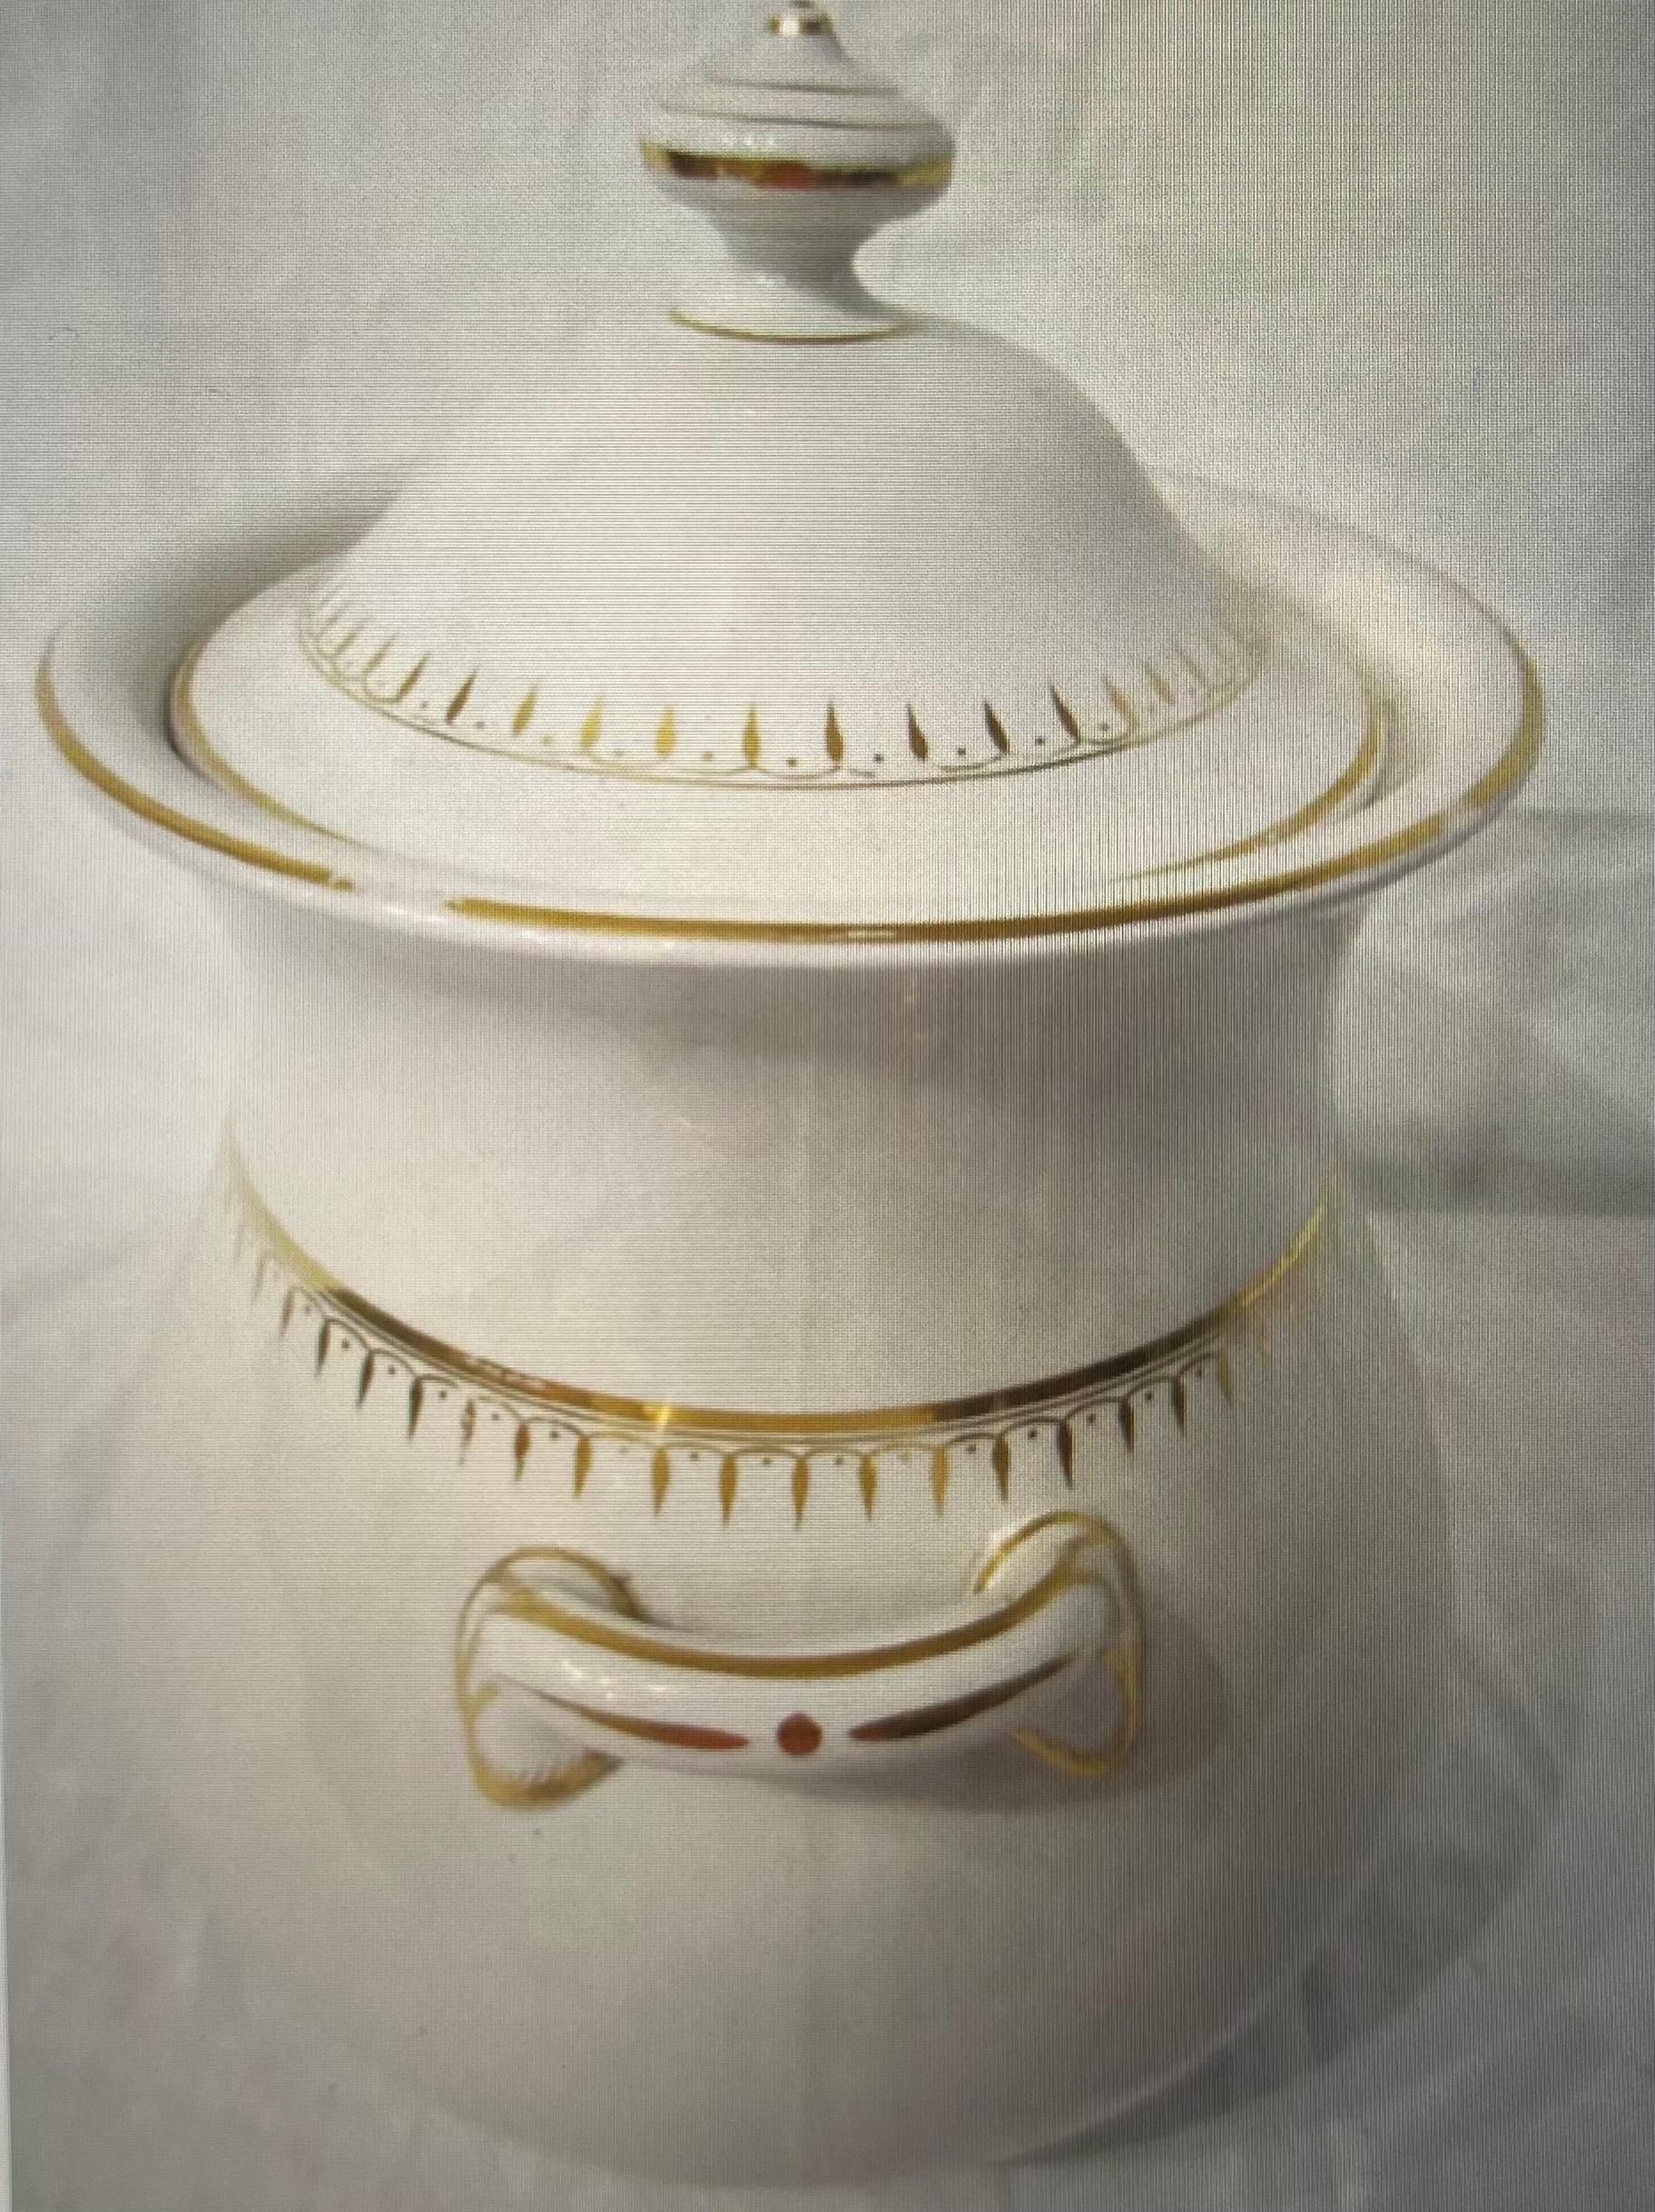 White & Gold Jar with Lid In Good Condition For Sale In East Hampton, NY